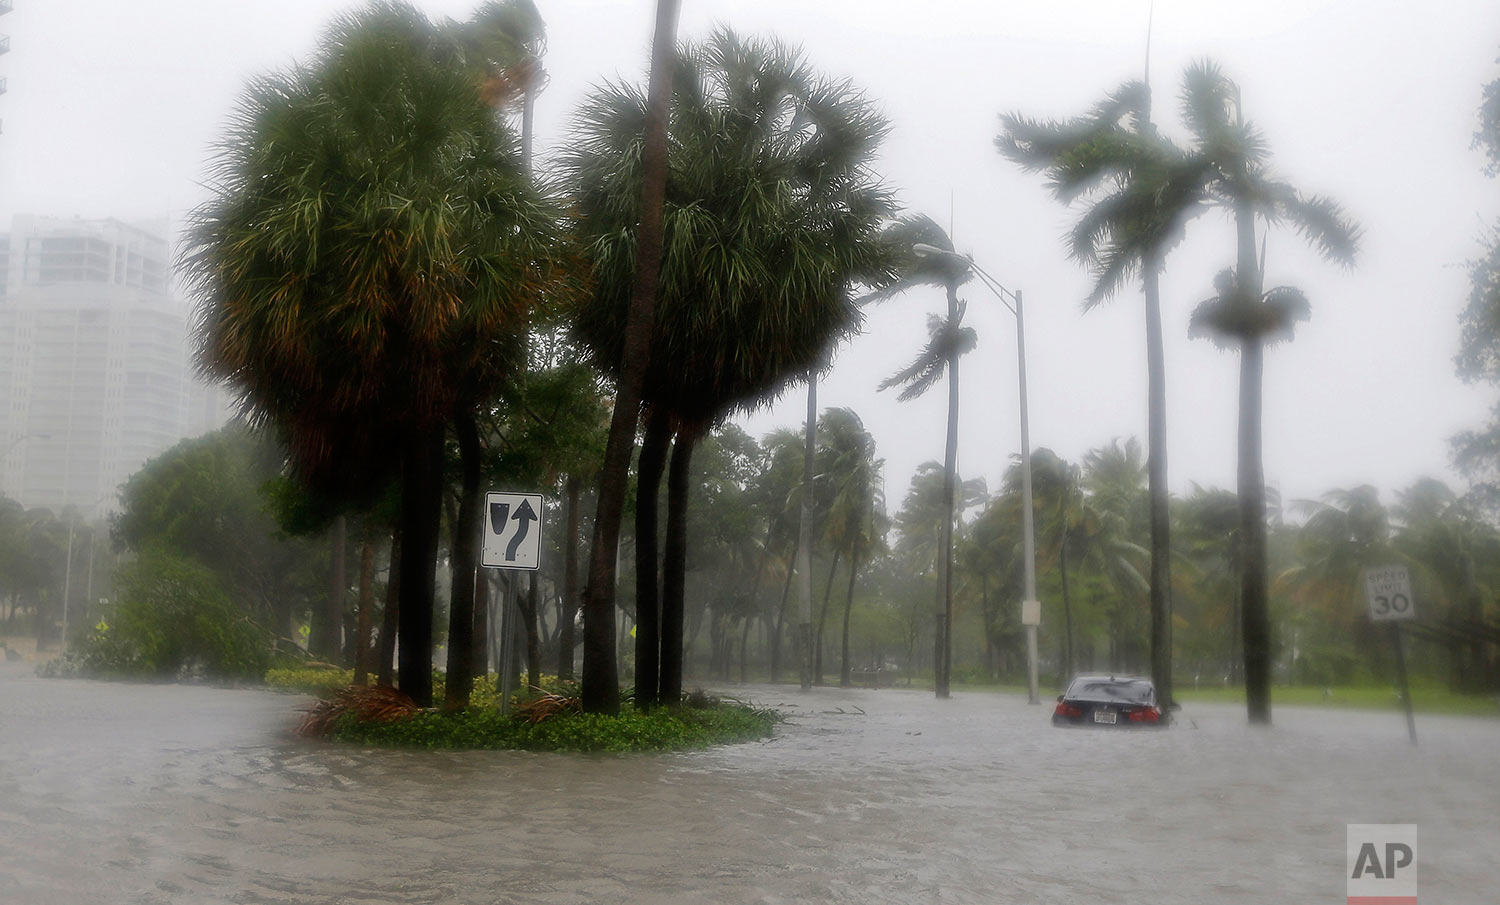  Heavy rains flood the streets in the Coconut Grove area in Miami on Sunday, Sept. 10, 2017, during Hurricane Irma. (AP Photo/Alan Diaz) 